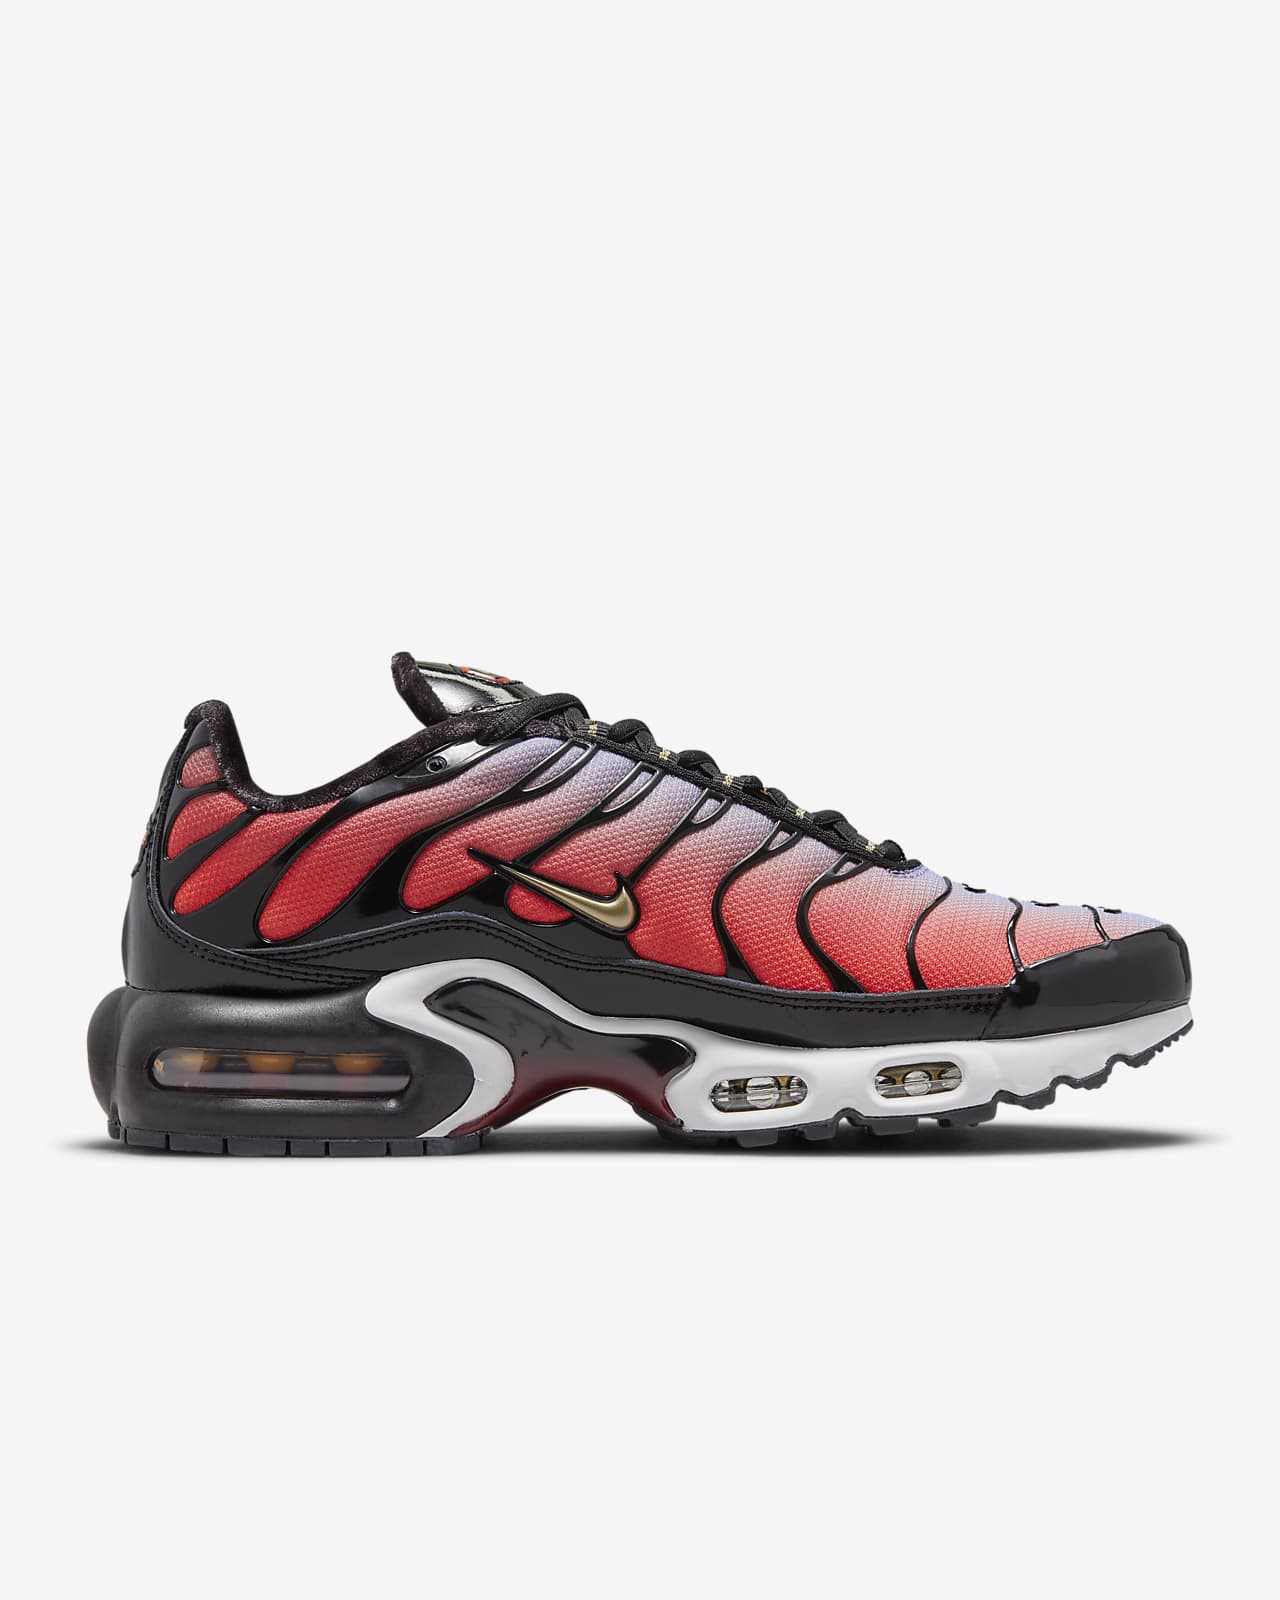 Nike Air Max Plus Women's Shoes السيف غاليري قدر ضغط